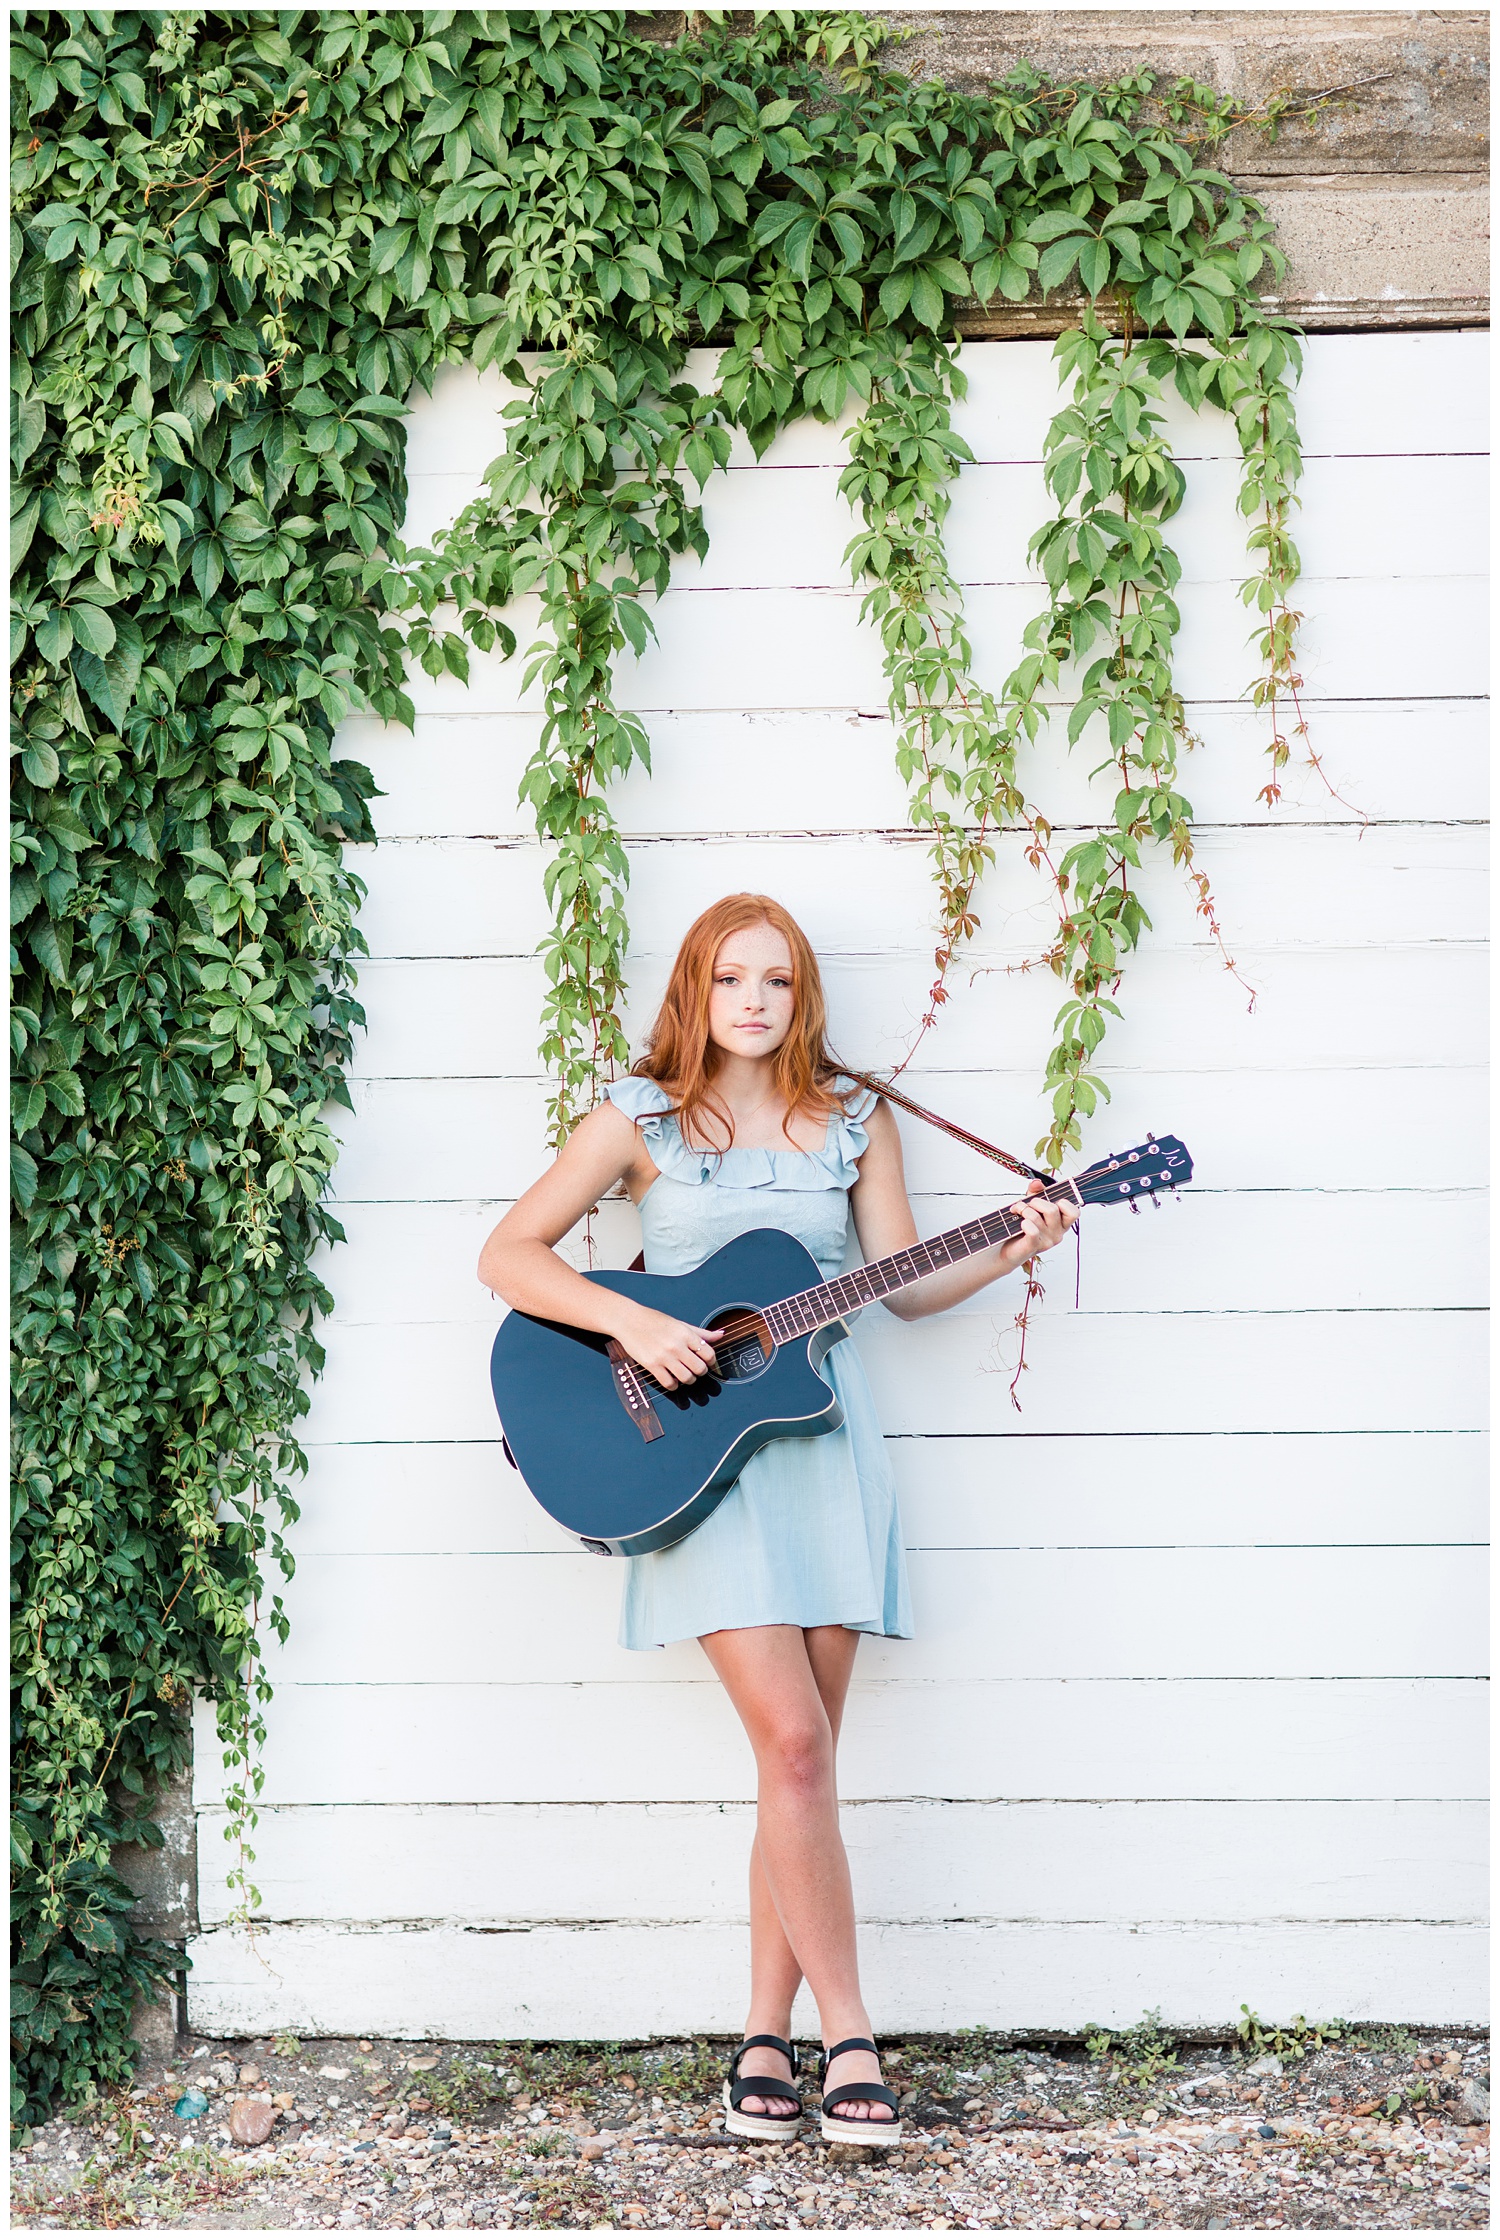 Senior girl leaning against a green vine wall playing guitar in West Bend, Iowa | CB Studio 